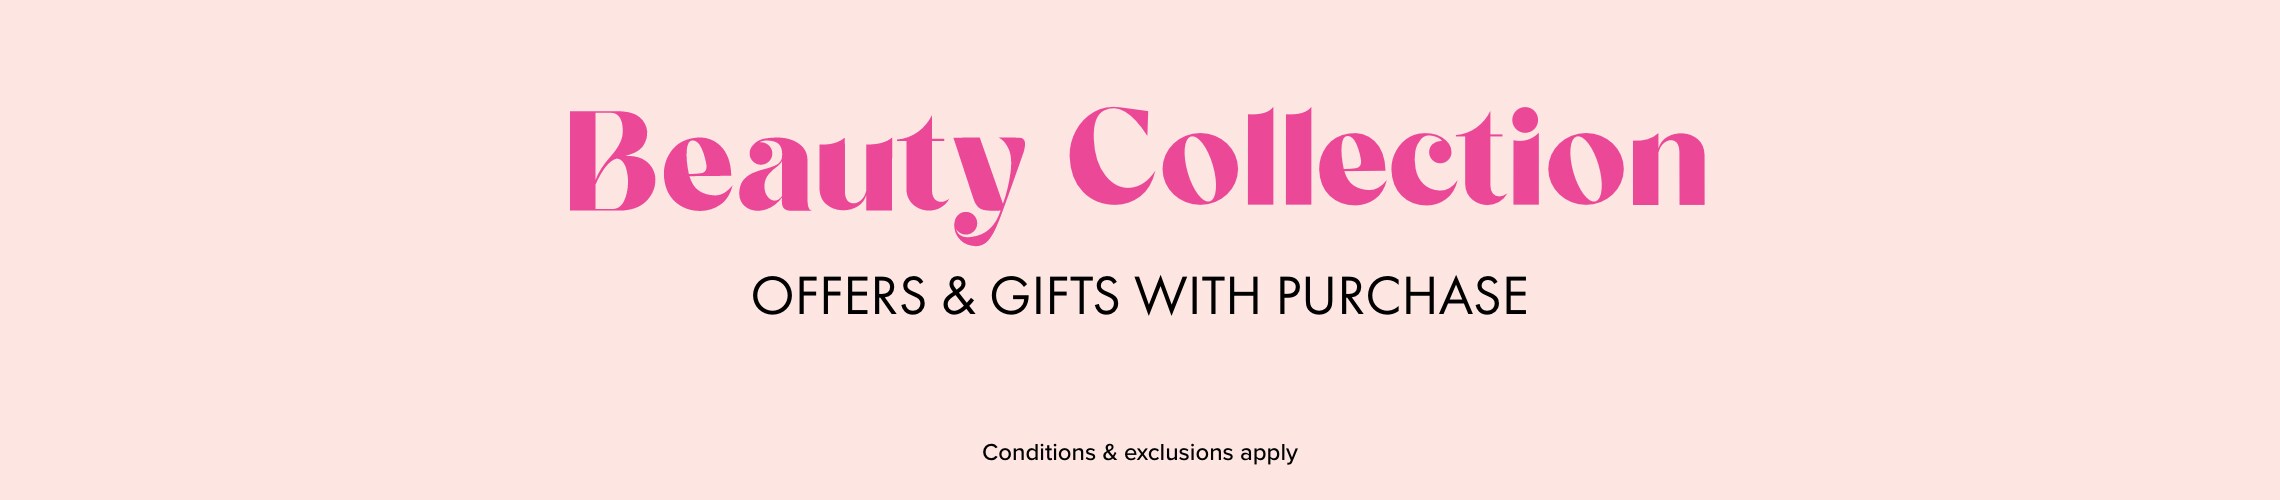 Beauty Offers & Gifts with Purchase